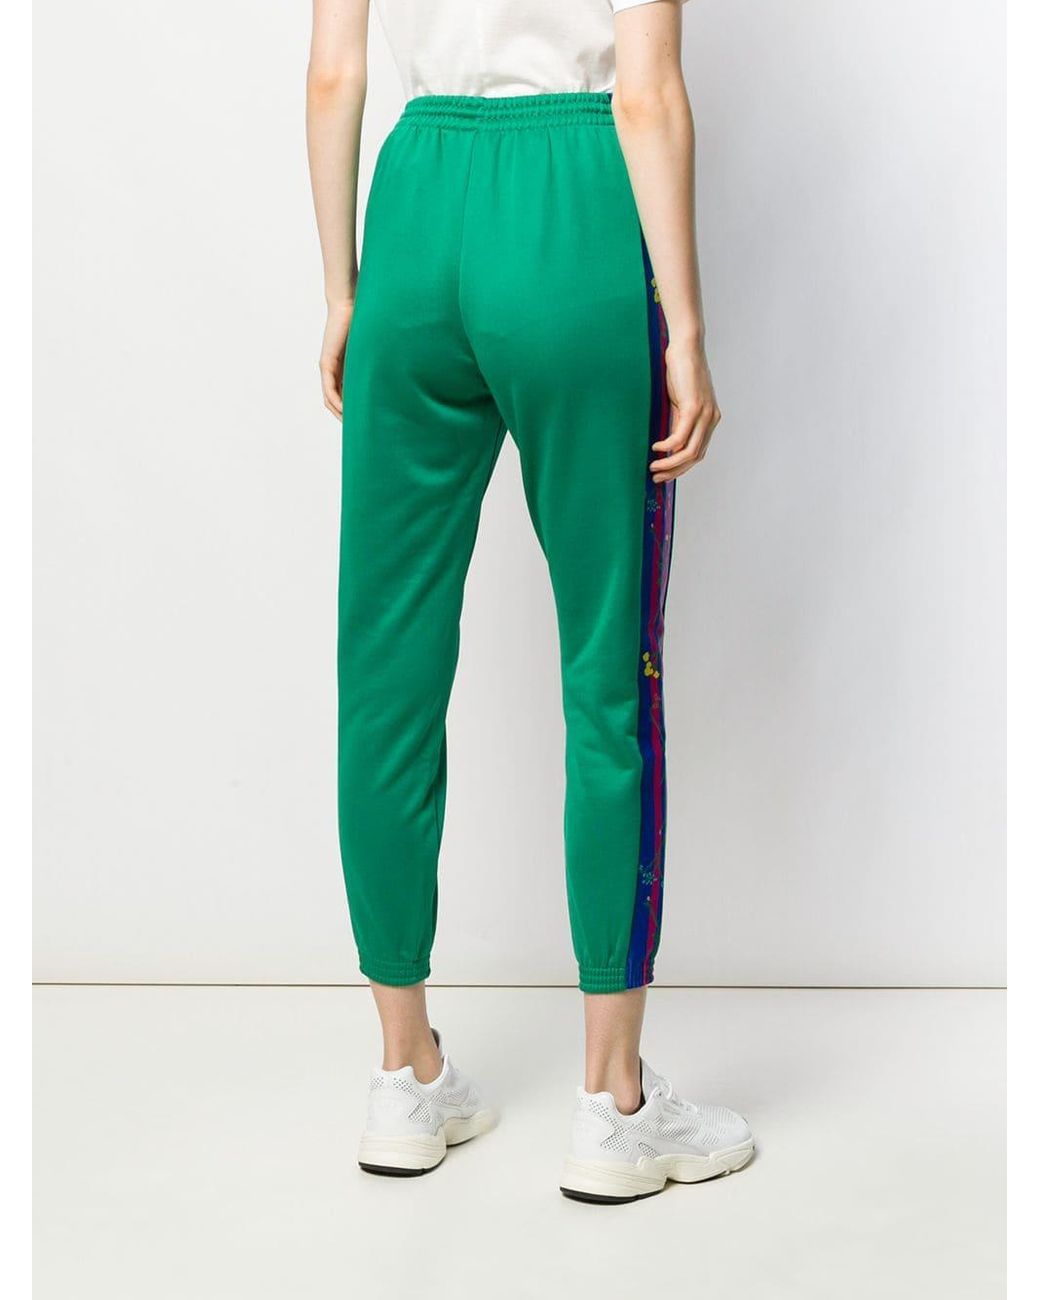 adidas Cotton Floral Track Pants in Green | Lyst